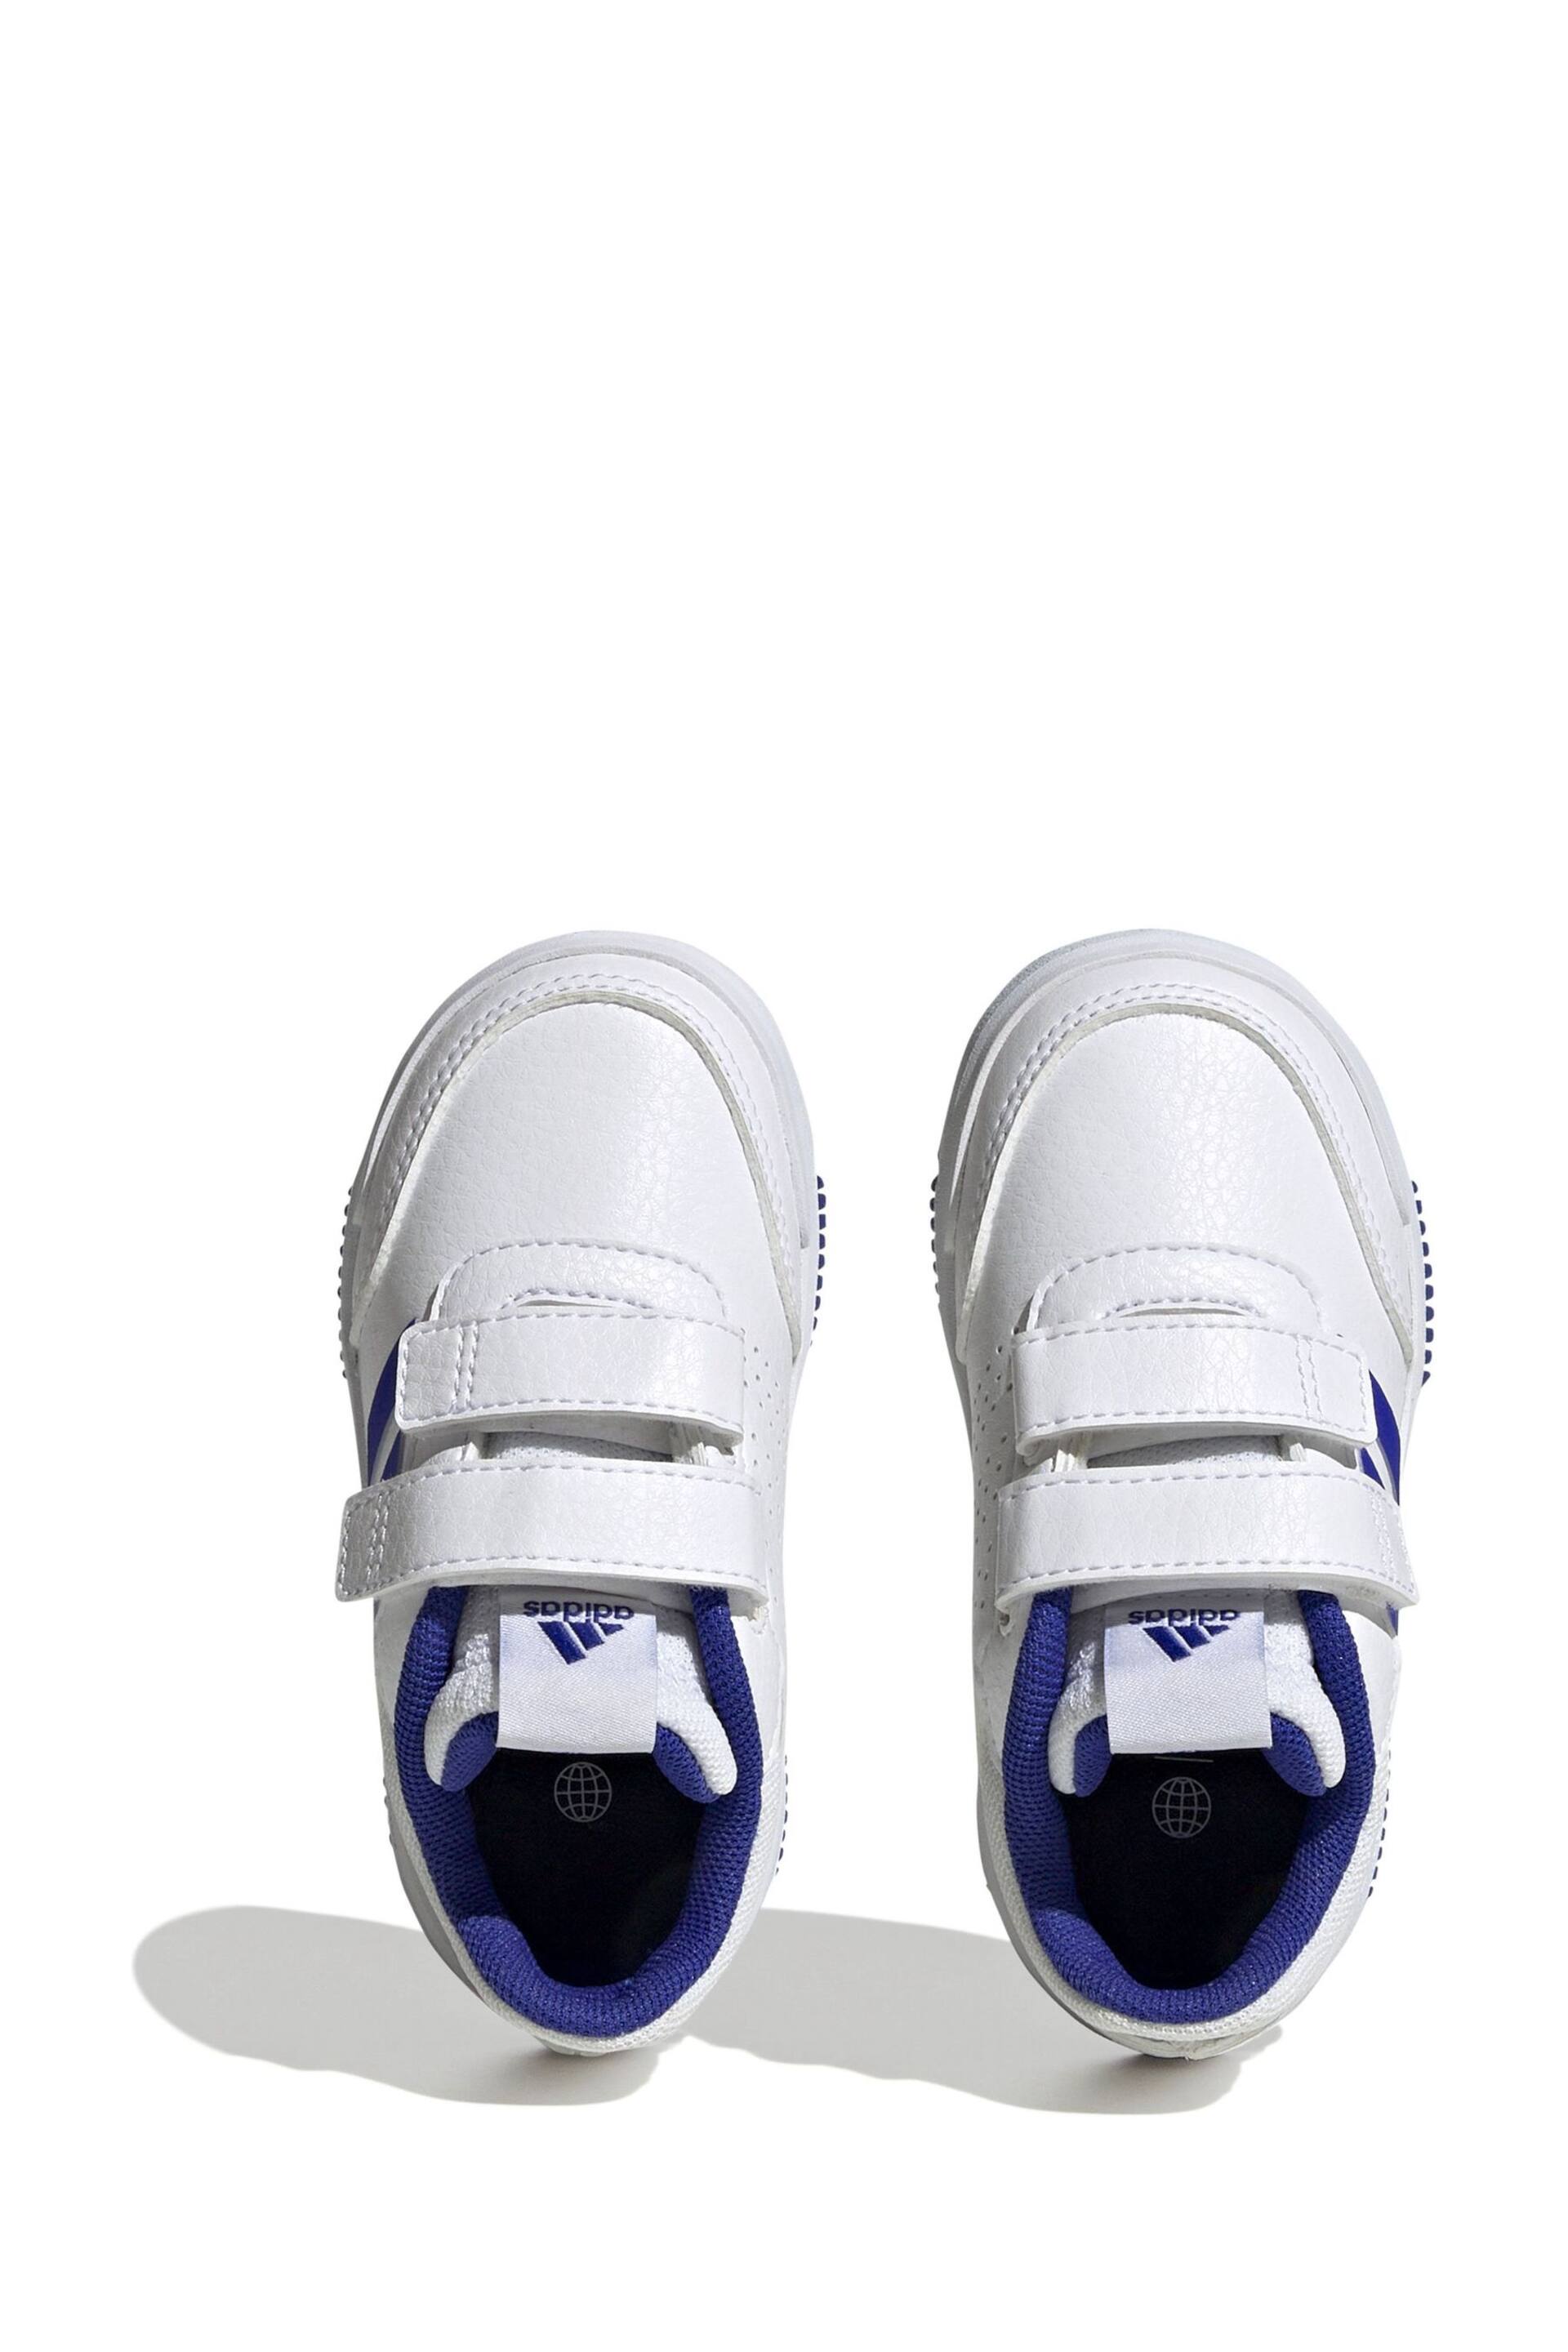 adidas White/Blue Tensaur Hook and Loop Shoes - Image 7 of 9